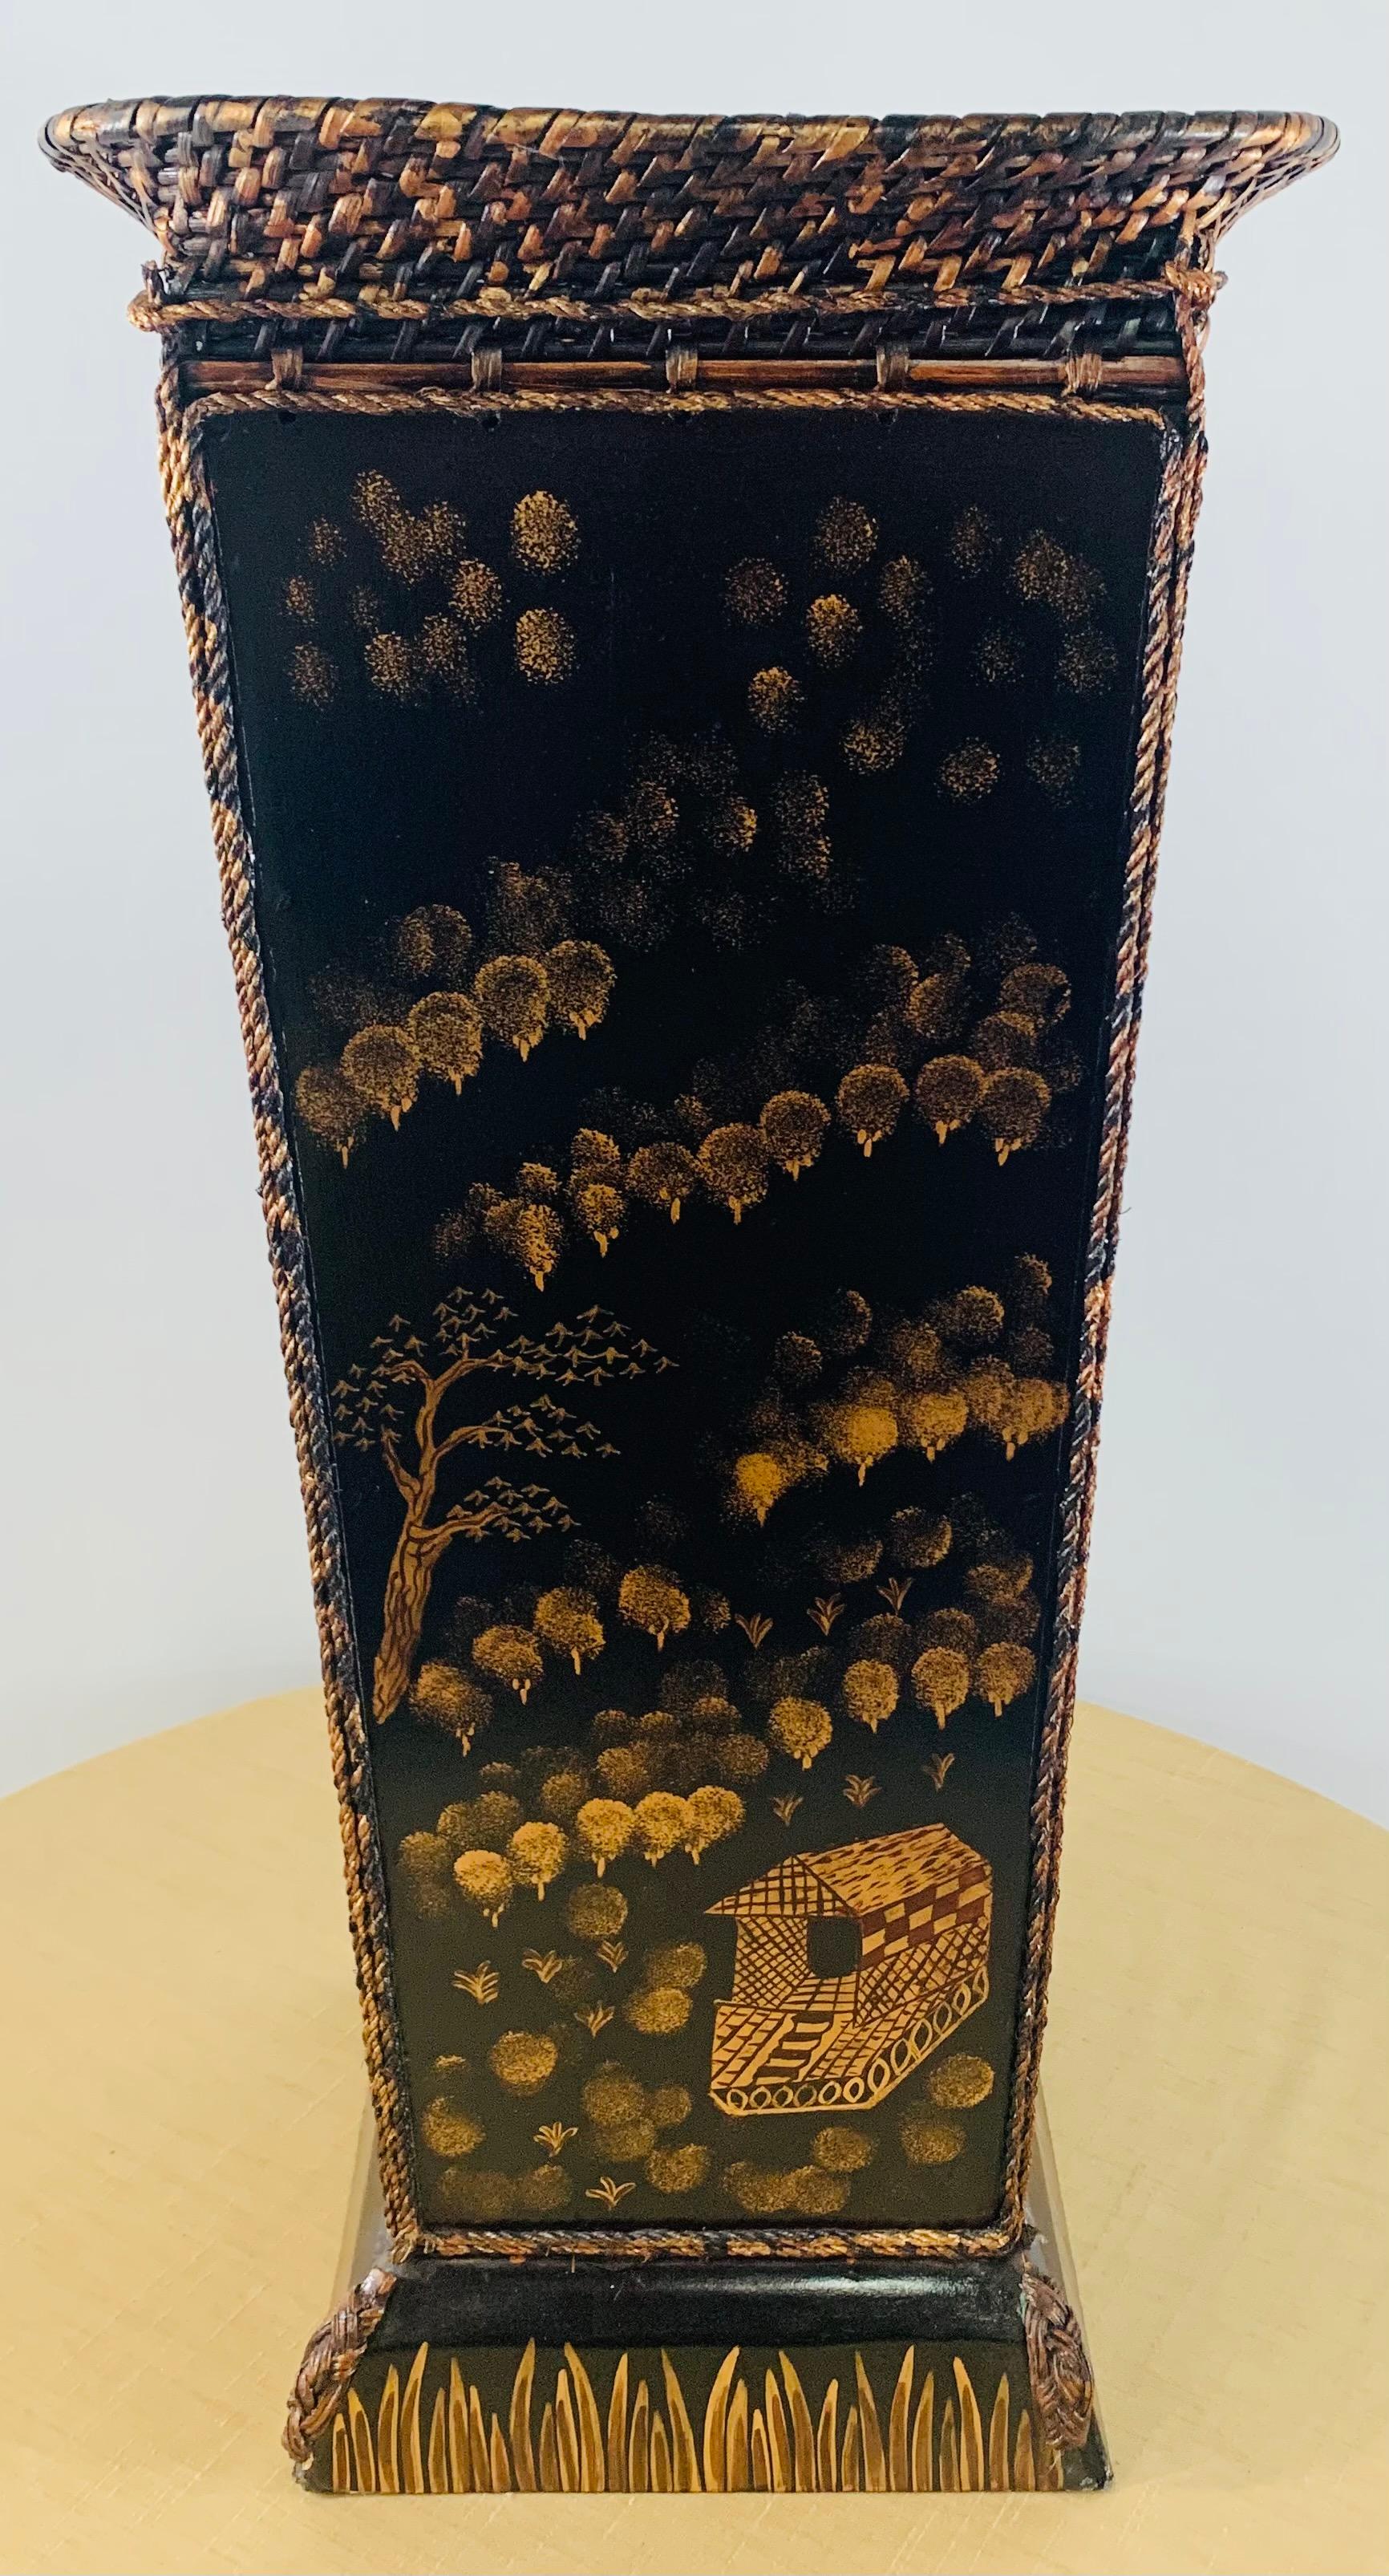 A stylish large square modernist shape planter or jardiniere adorned with gilt decoration on a dark ebonized background. Each panel is nicely hand painted with trees and plants motifs. The mouth of the planter is decorated with waved cane as well as